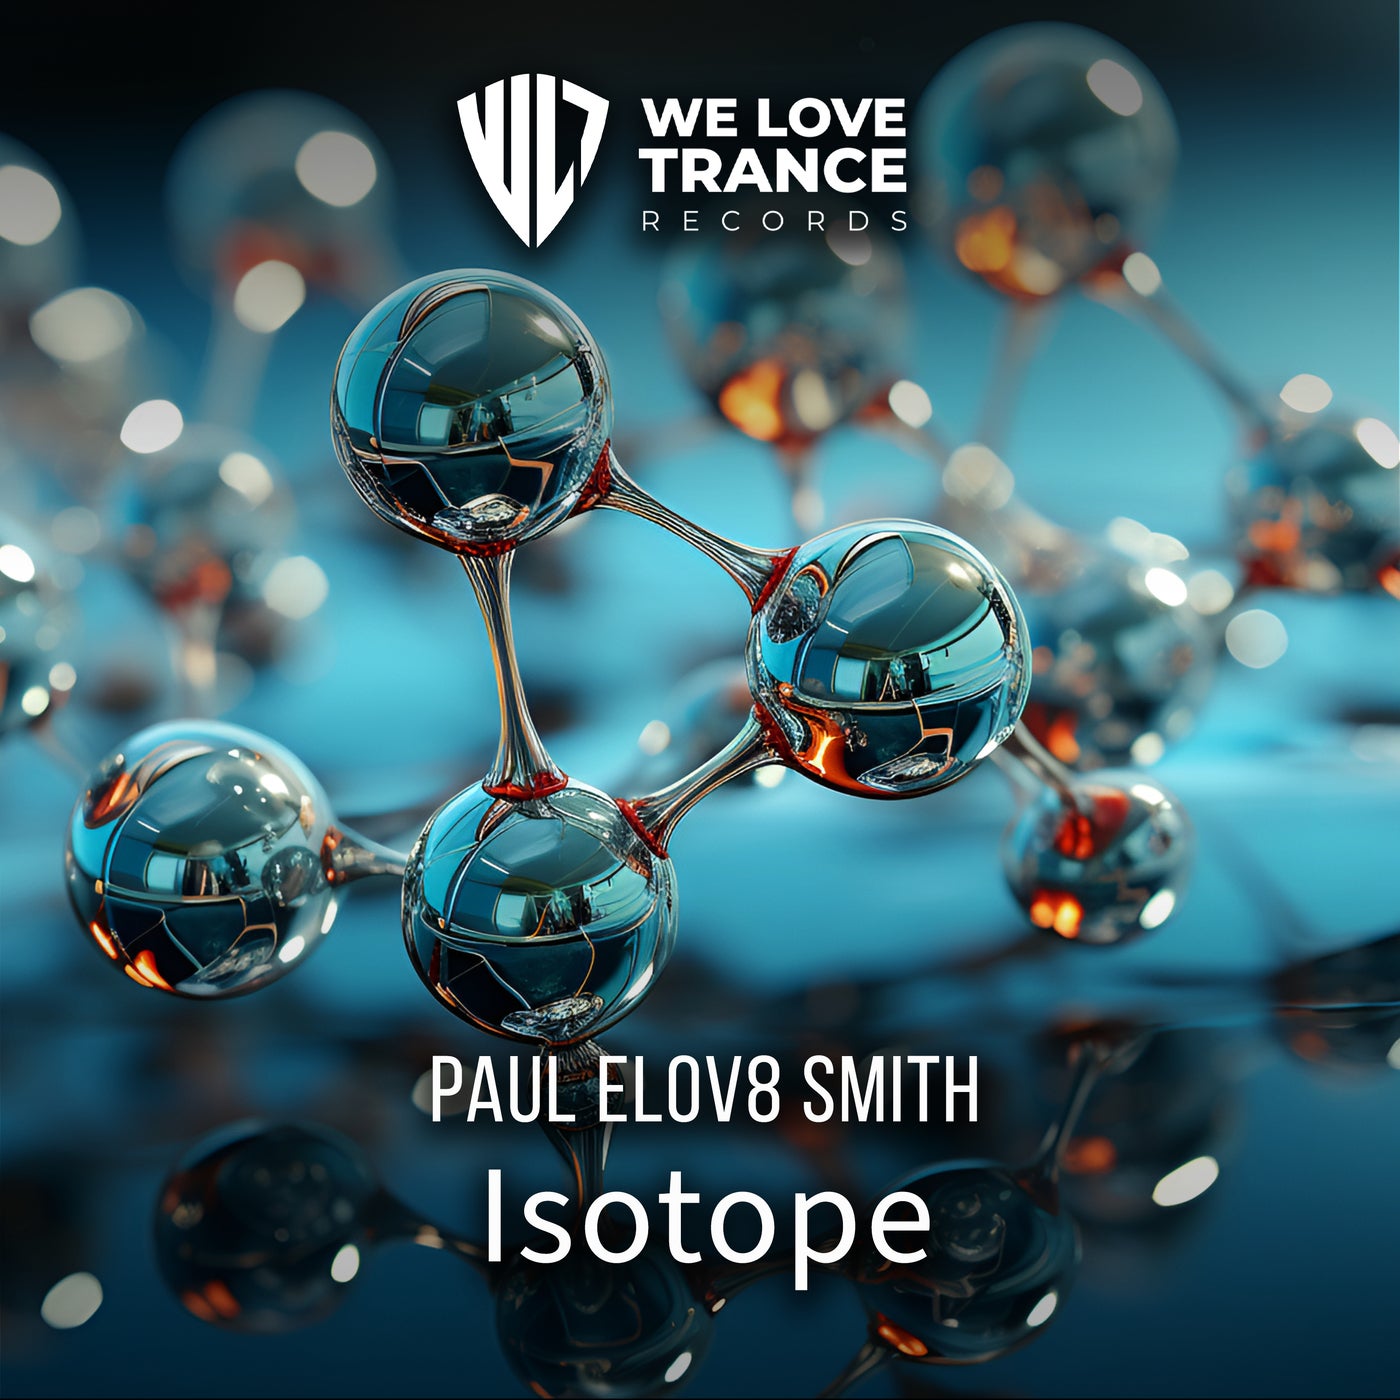 ISOTOPE